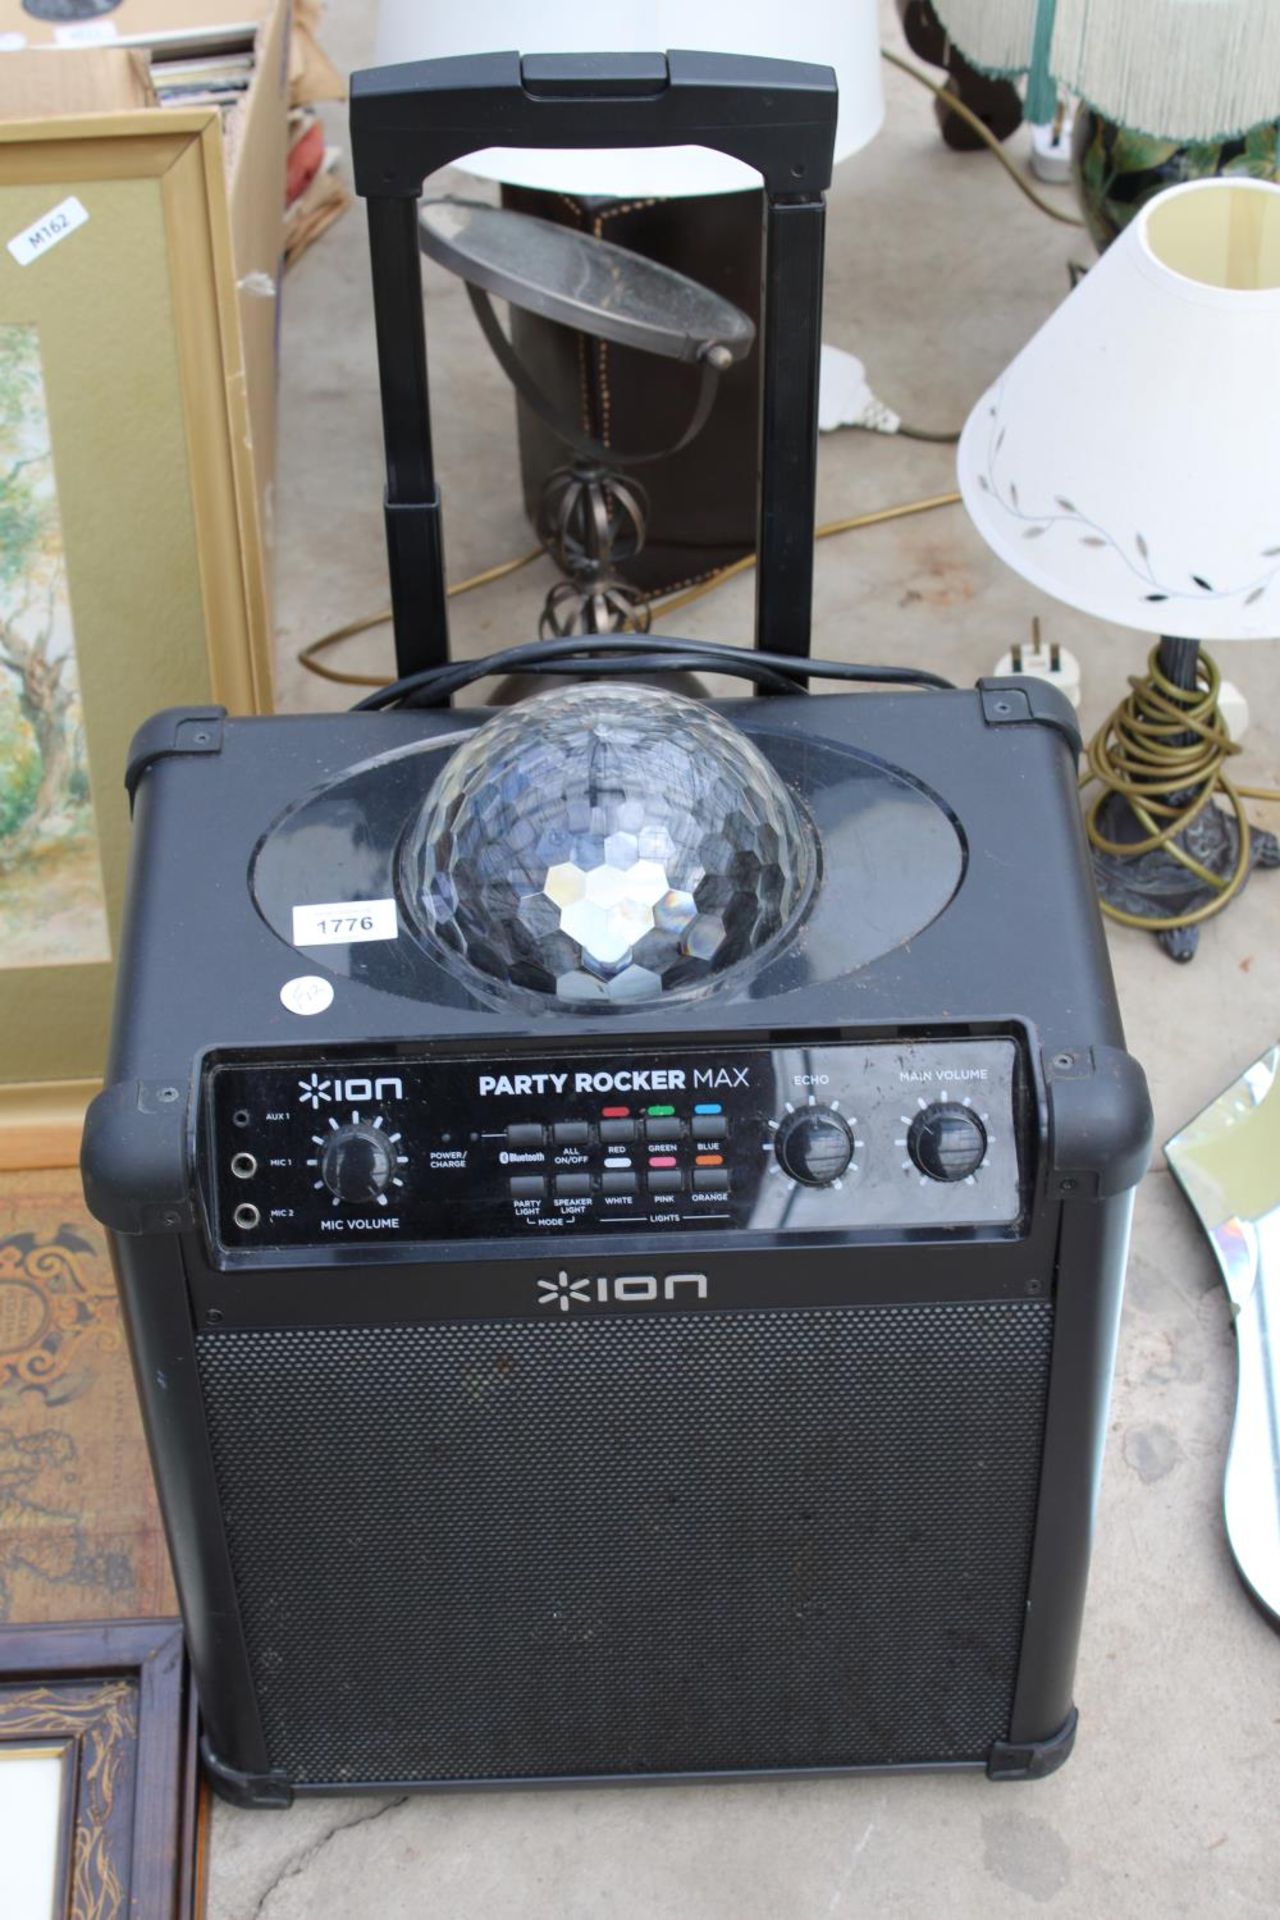 AN ION PARTY ROCKER MAX SPEAKER AND DISCO LIGHT